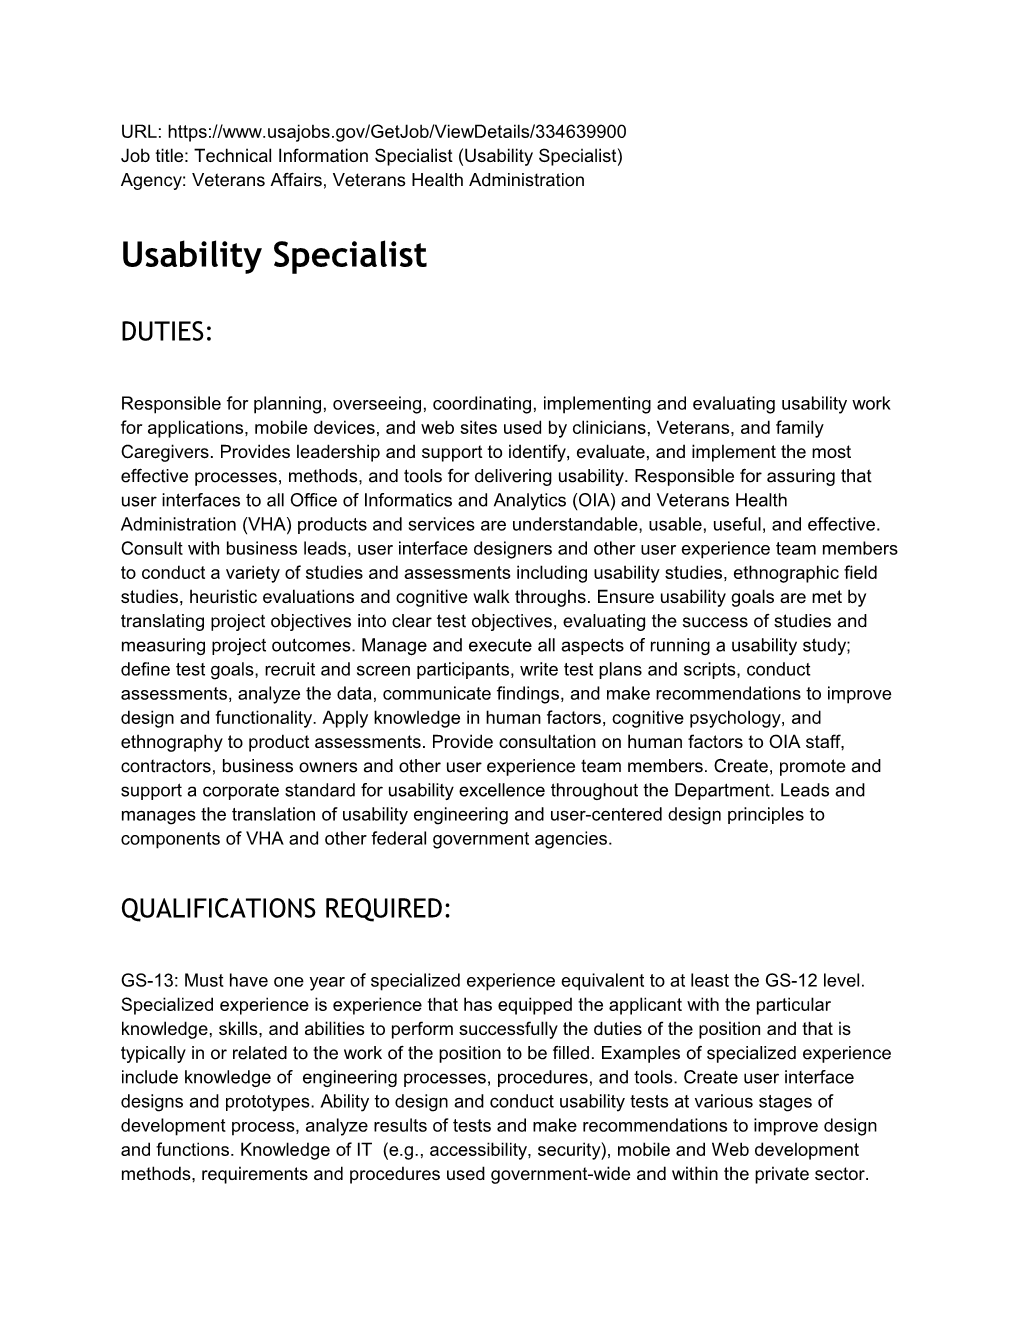 Job Title: Technical Information Specialist (Usability Specialist)